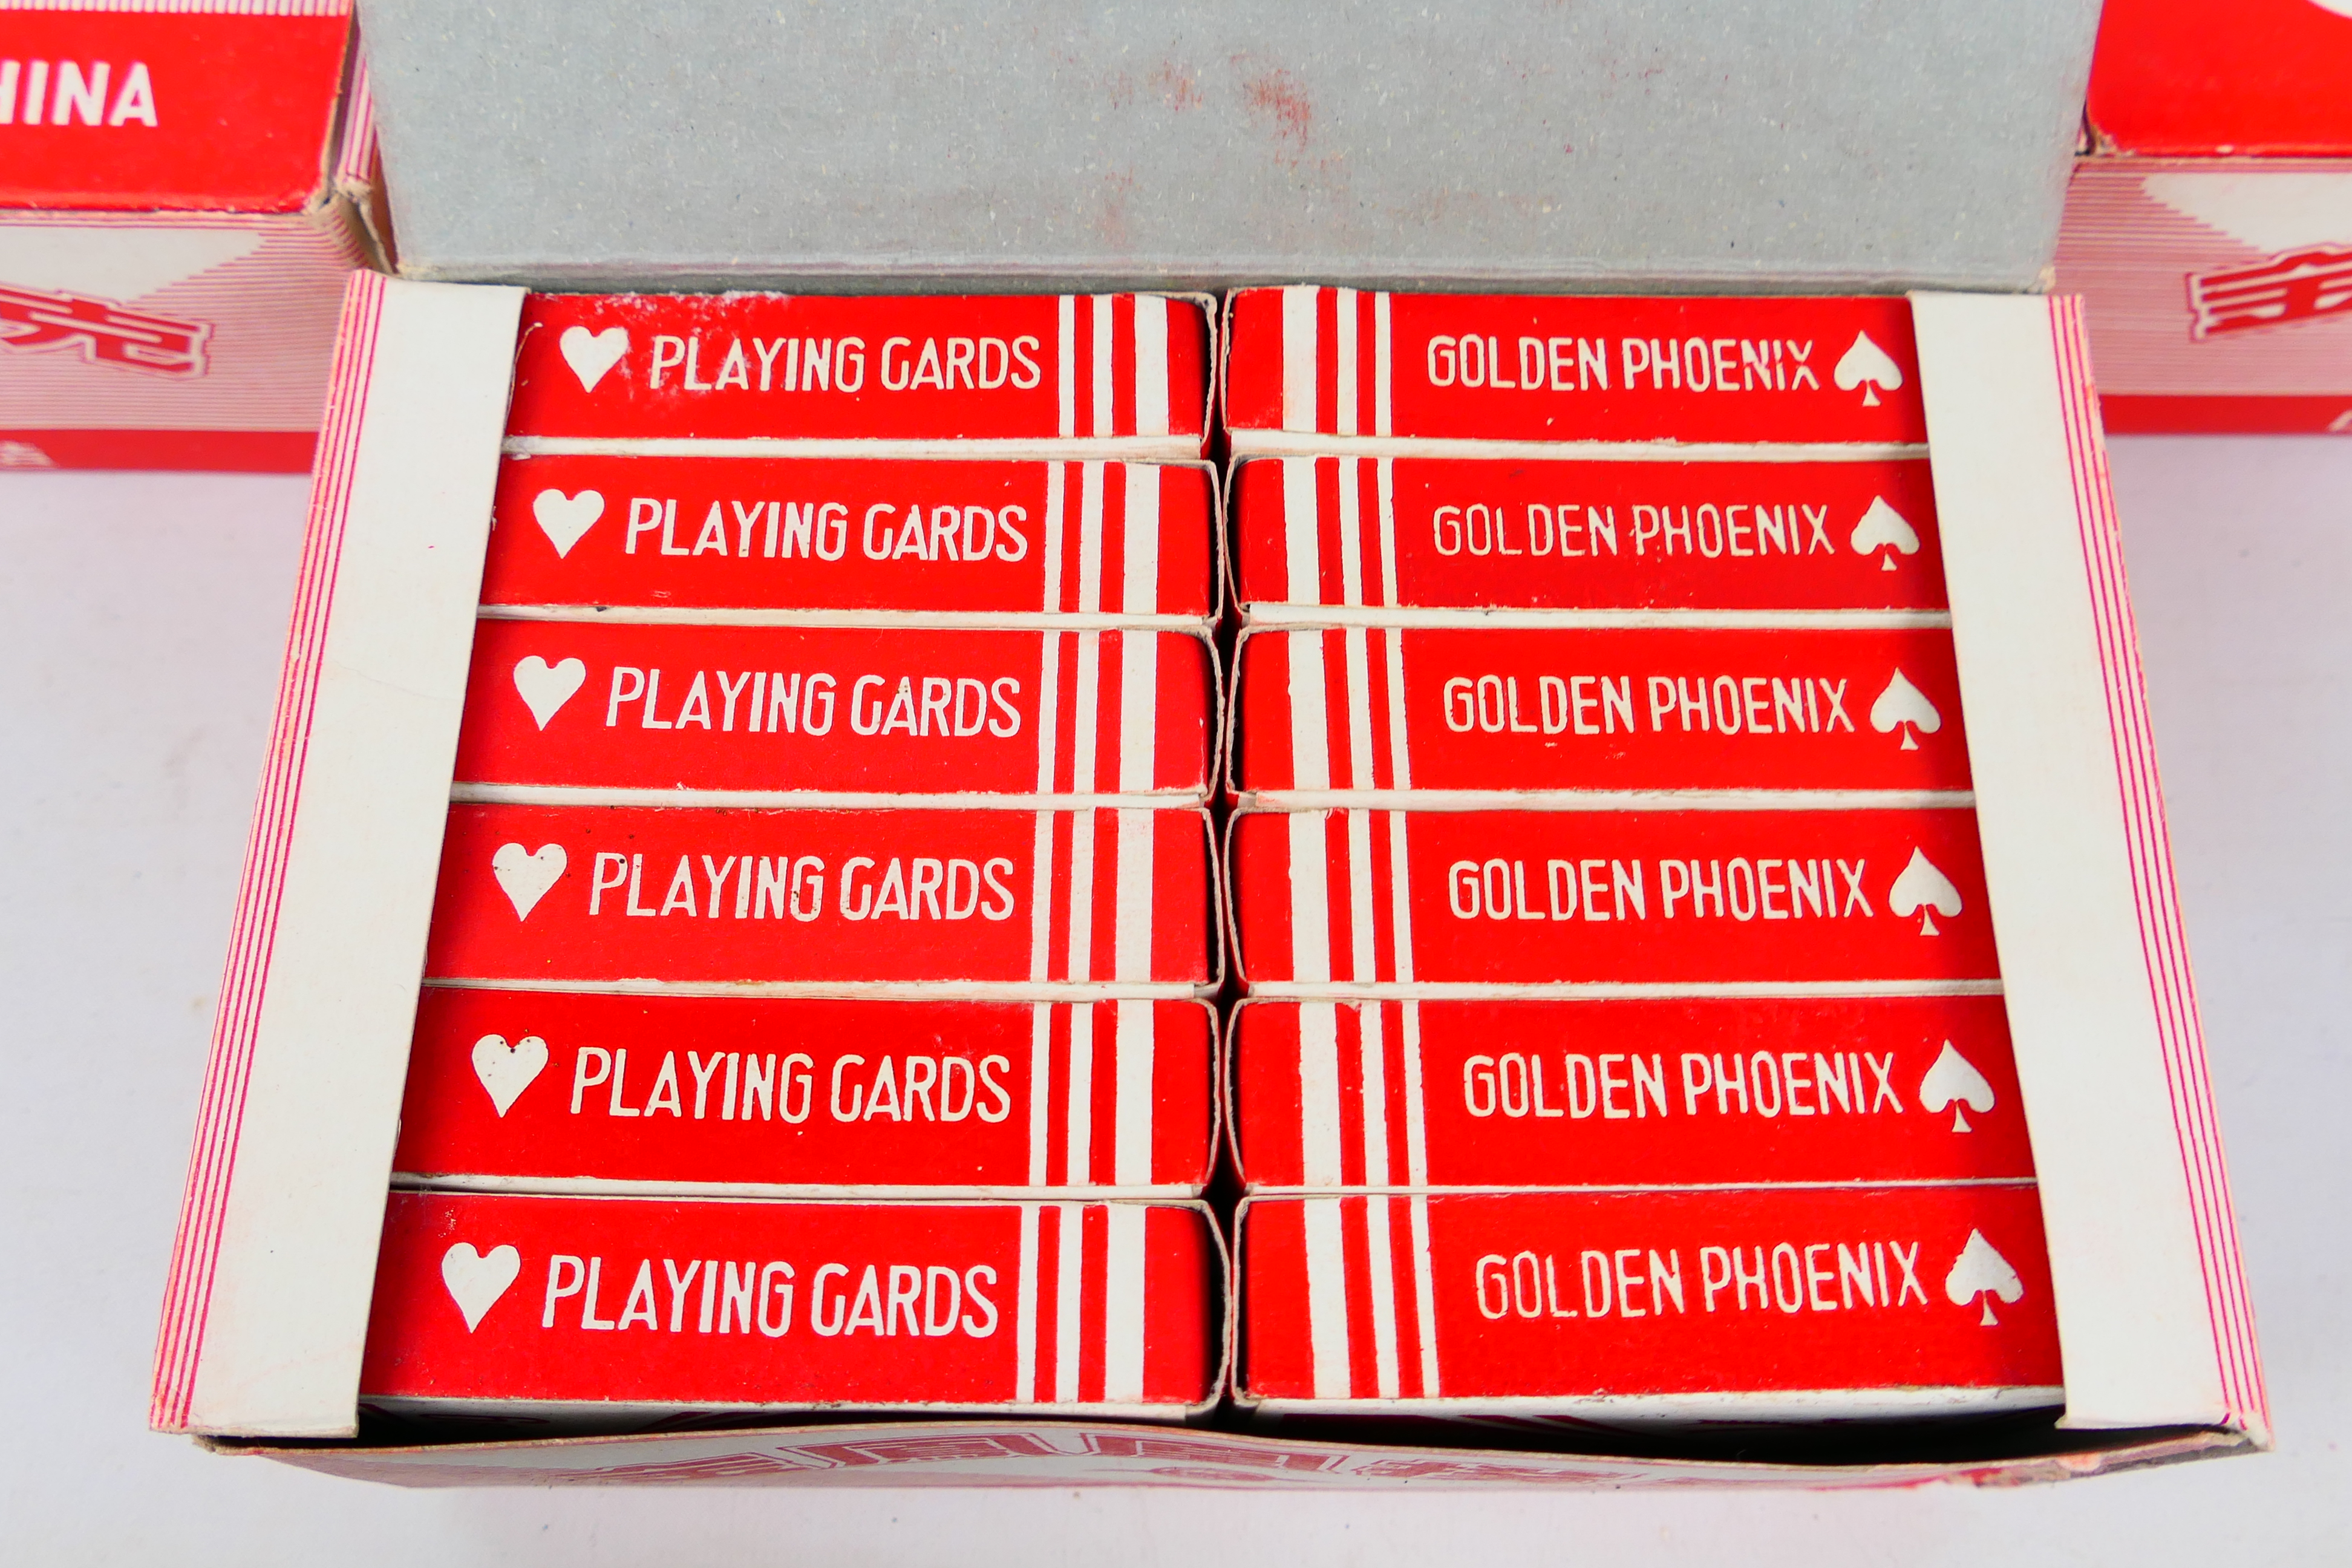 Golden Phoenix - Playing Cards - Unsold Shop Stock - A bulk load of 11 boxes of Golden Phoenix - Image 2 of 3